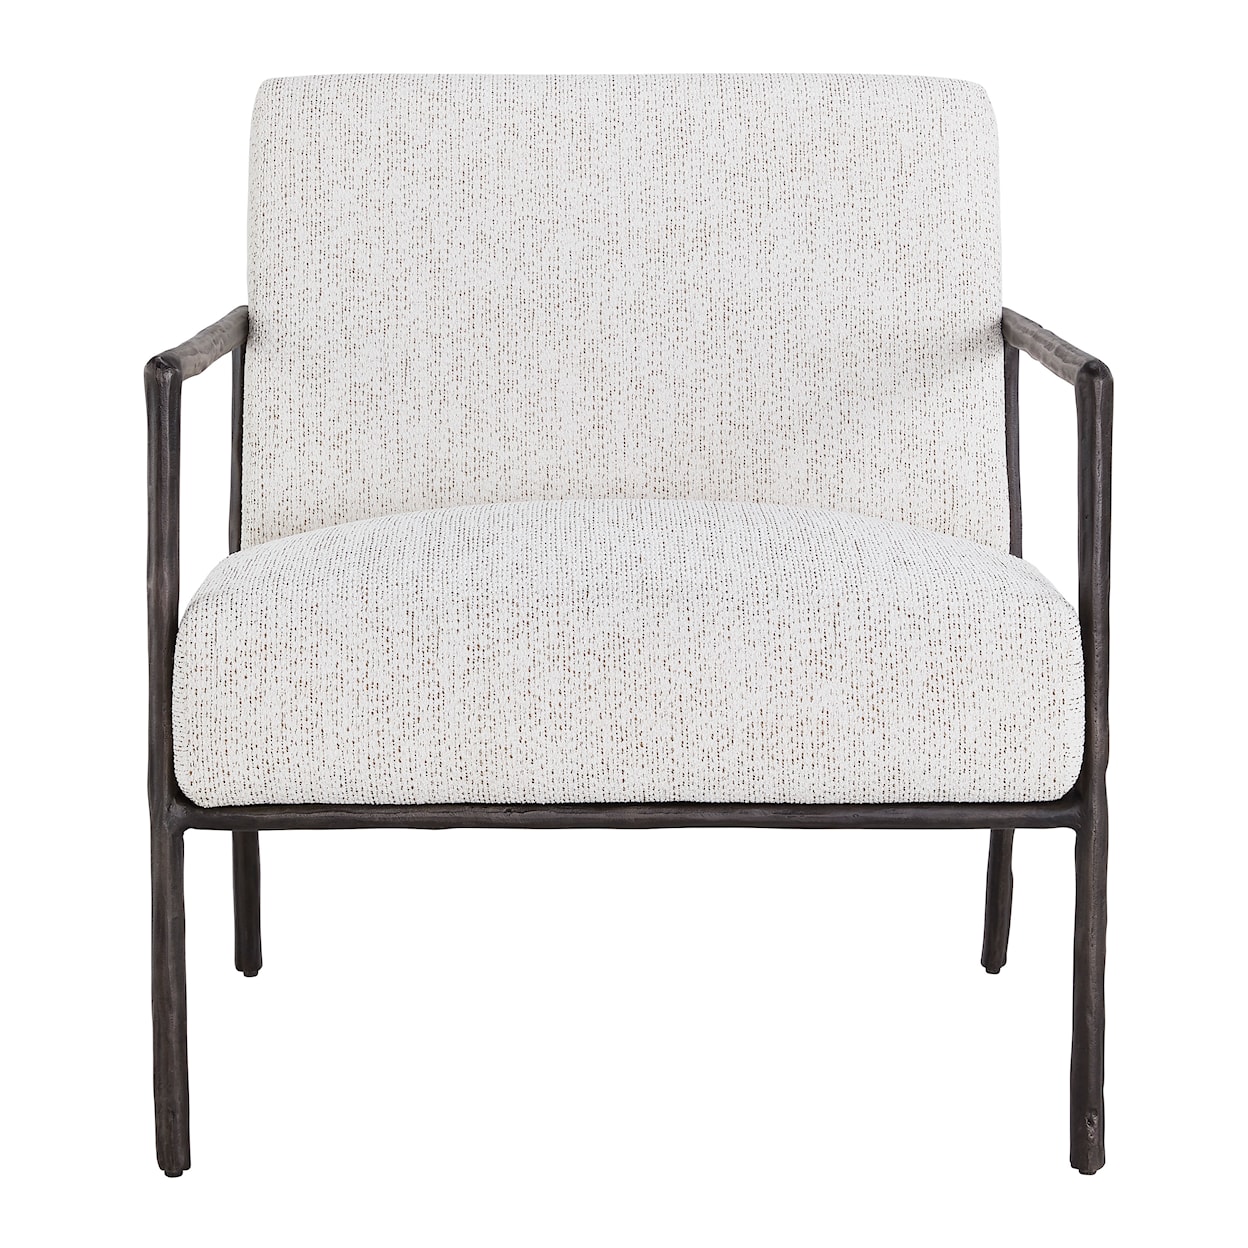 Benchcraft Ryandale Accent Chair